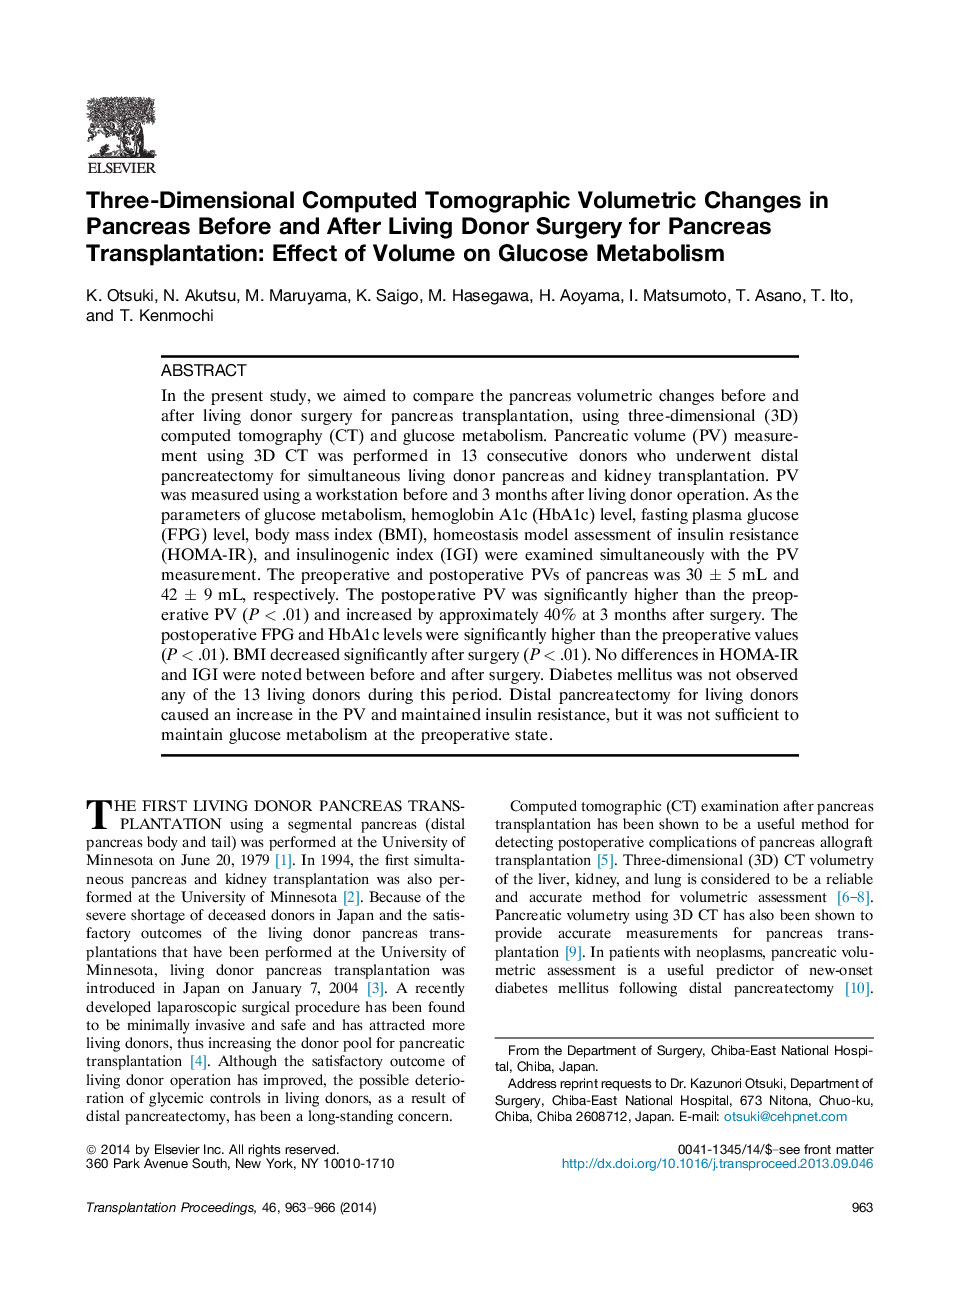 Three-Dimensional Computed Tomographic Volumetric Changes in Pancreas Before and After Living Donor Surgery for Pancreas Transplantation: Effect of Volume on Glucose Metabolism